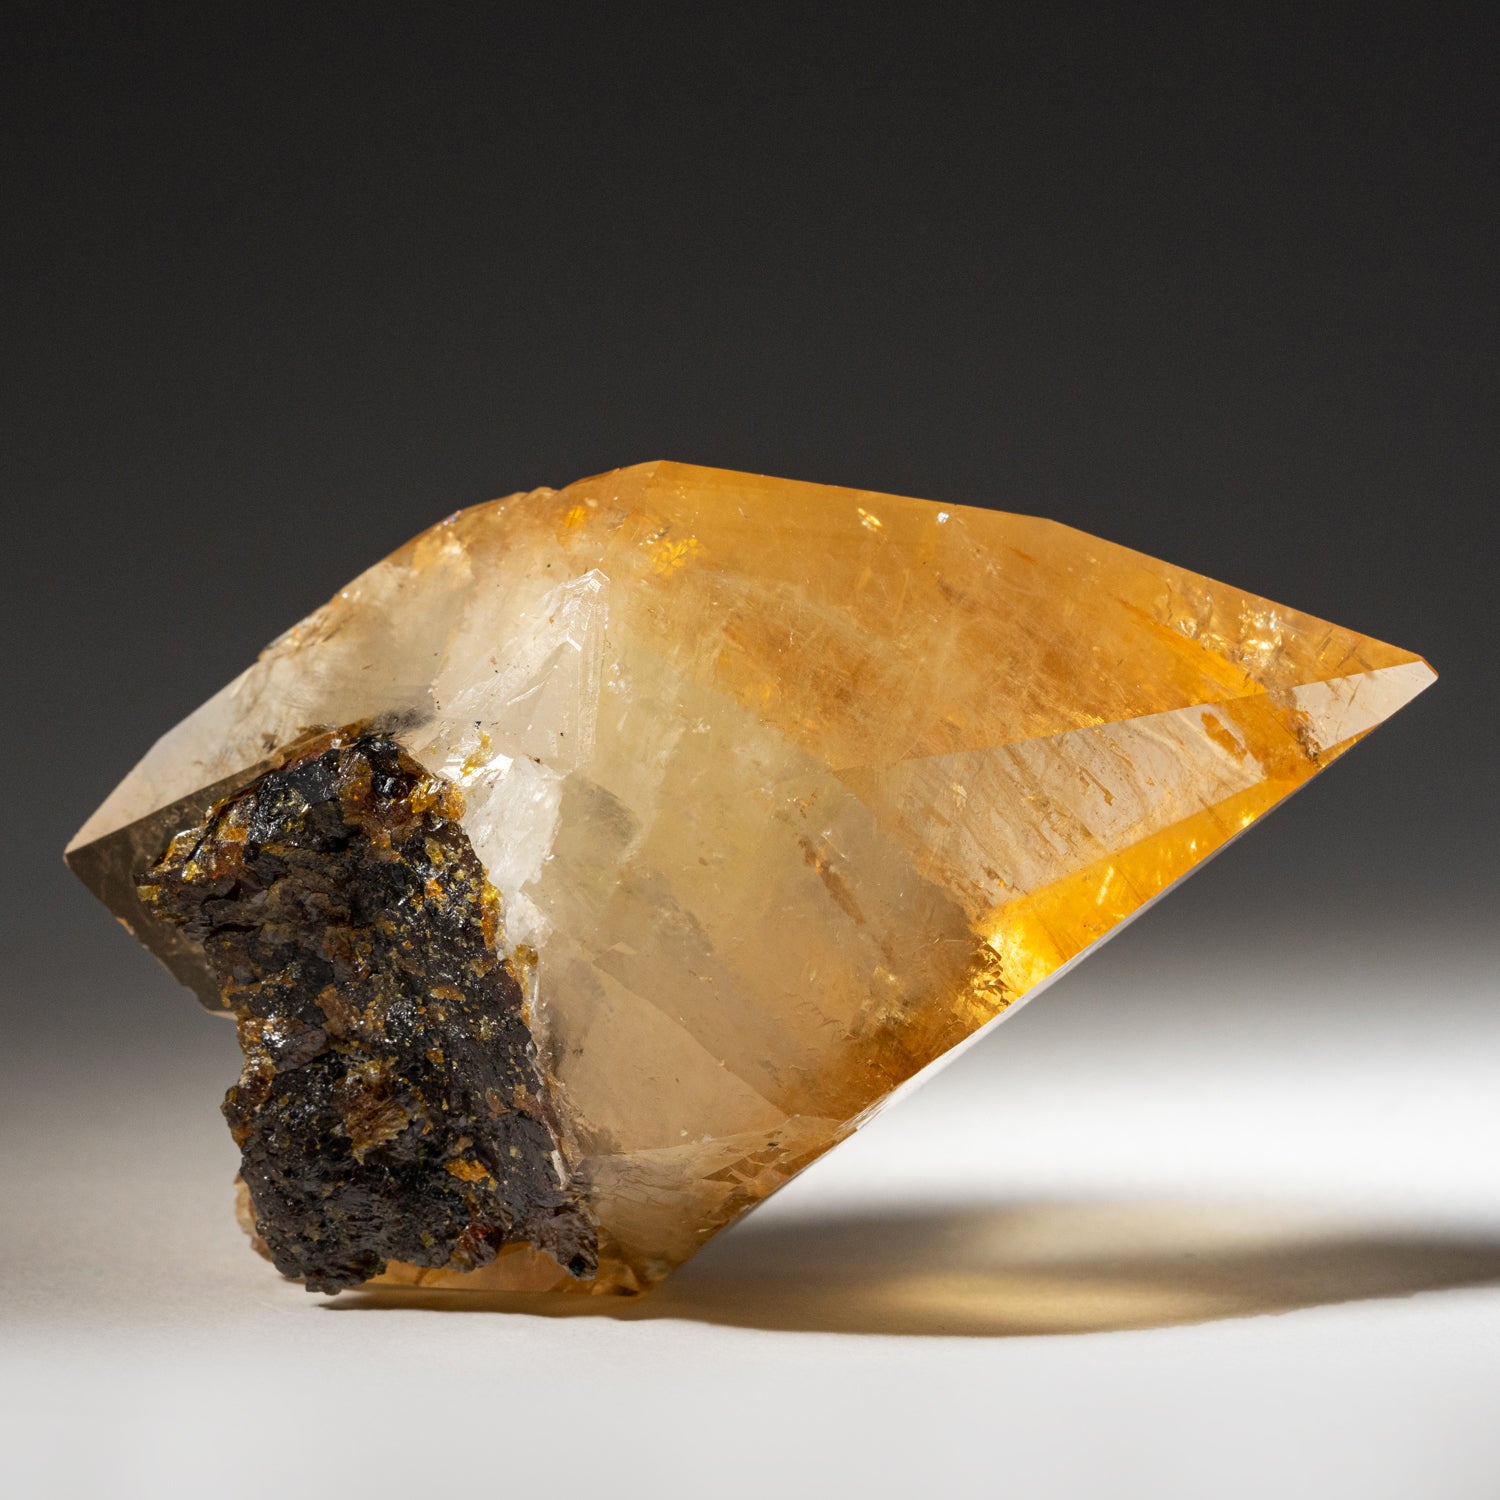 Twinned Golden Calcite Crystal from Elmwood Mine, Tennessee (75.2 grams)